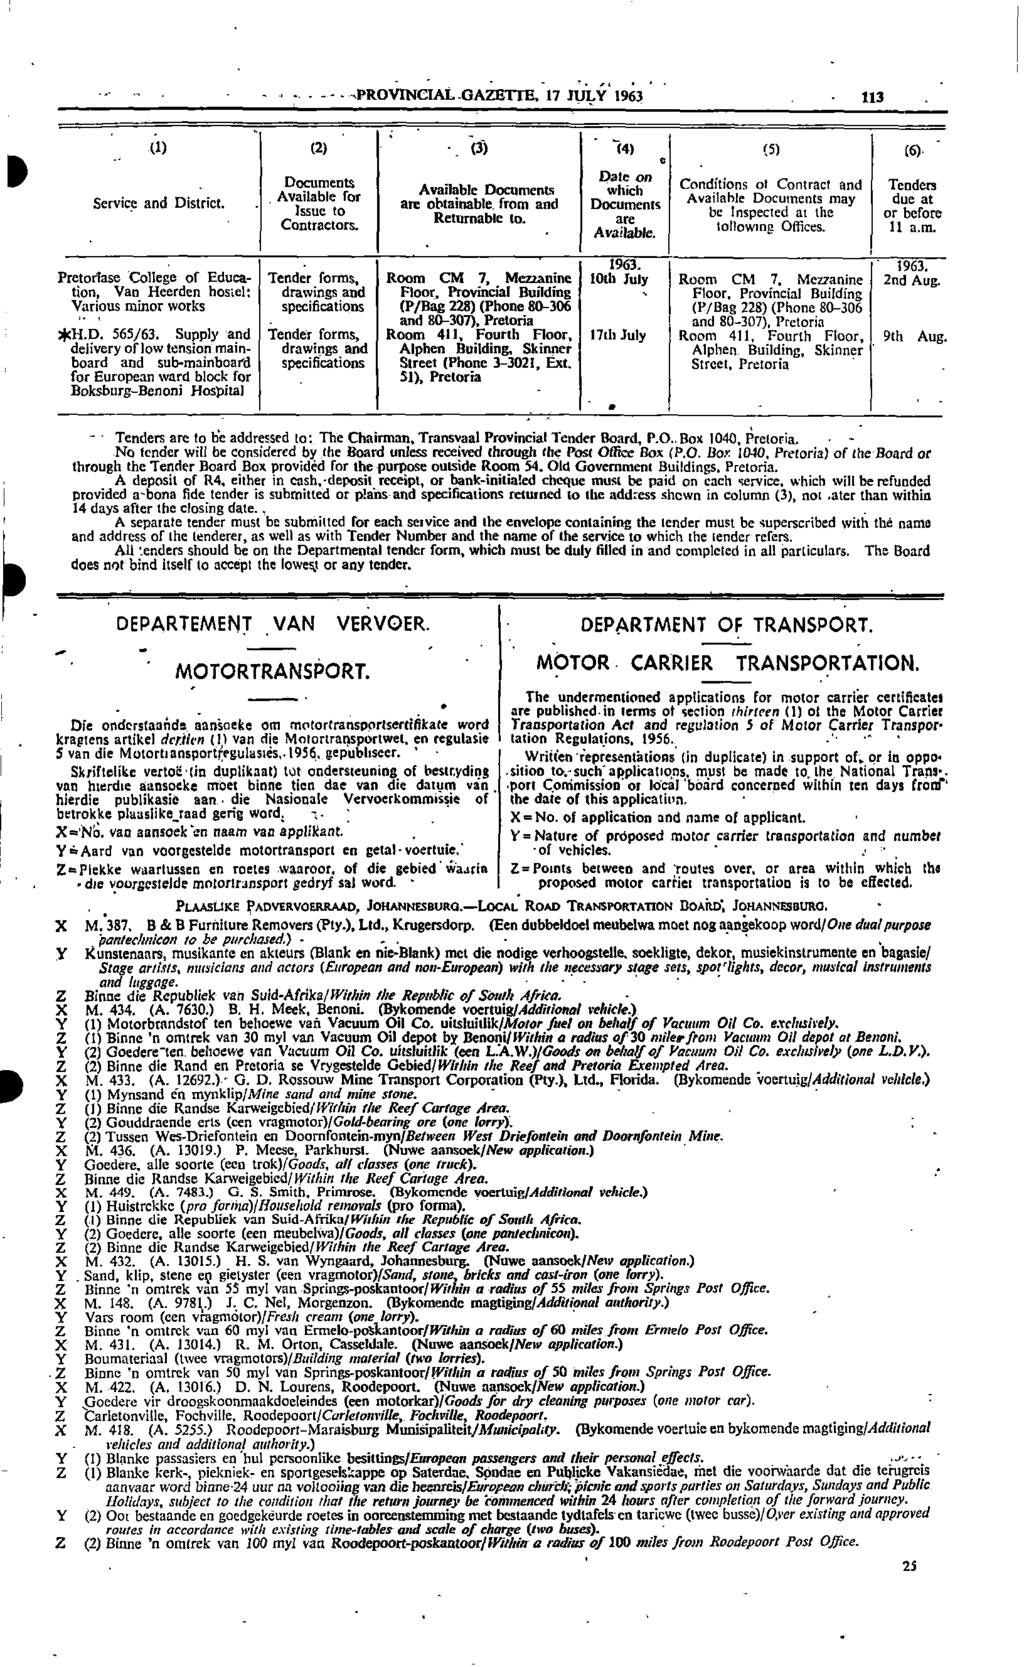 PROVNCAL GAZETTE 17 JULY 1963 113 (1) (2) (1) (4) (5) (6) a Documents Date on Available Documents Conditions of Contract and Tenders Available for whichavailable Documents may due at Service and